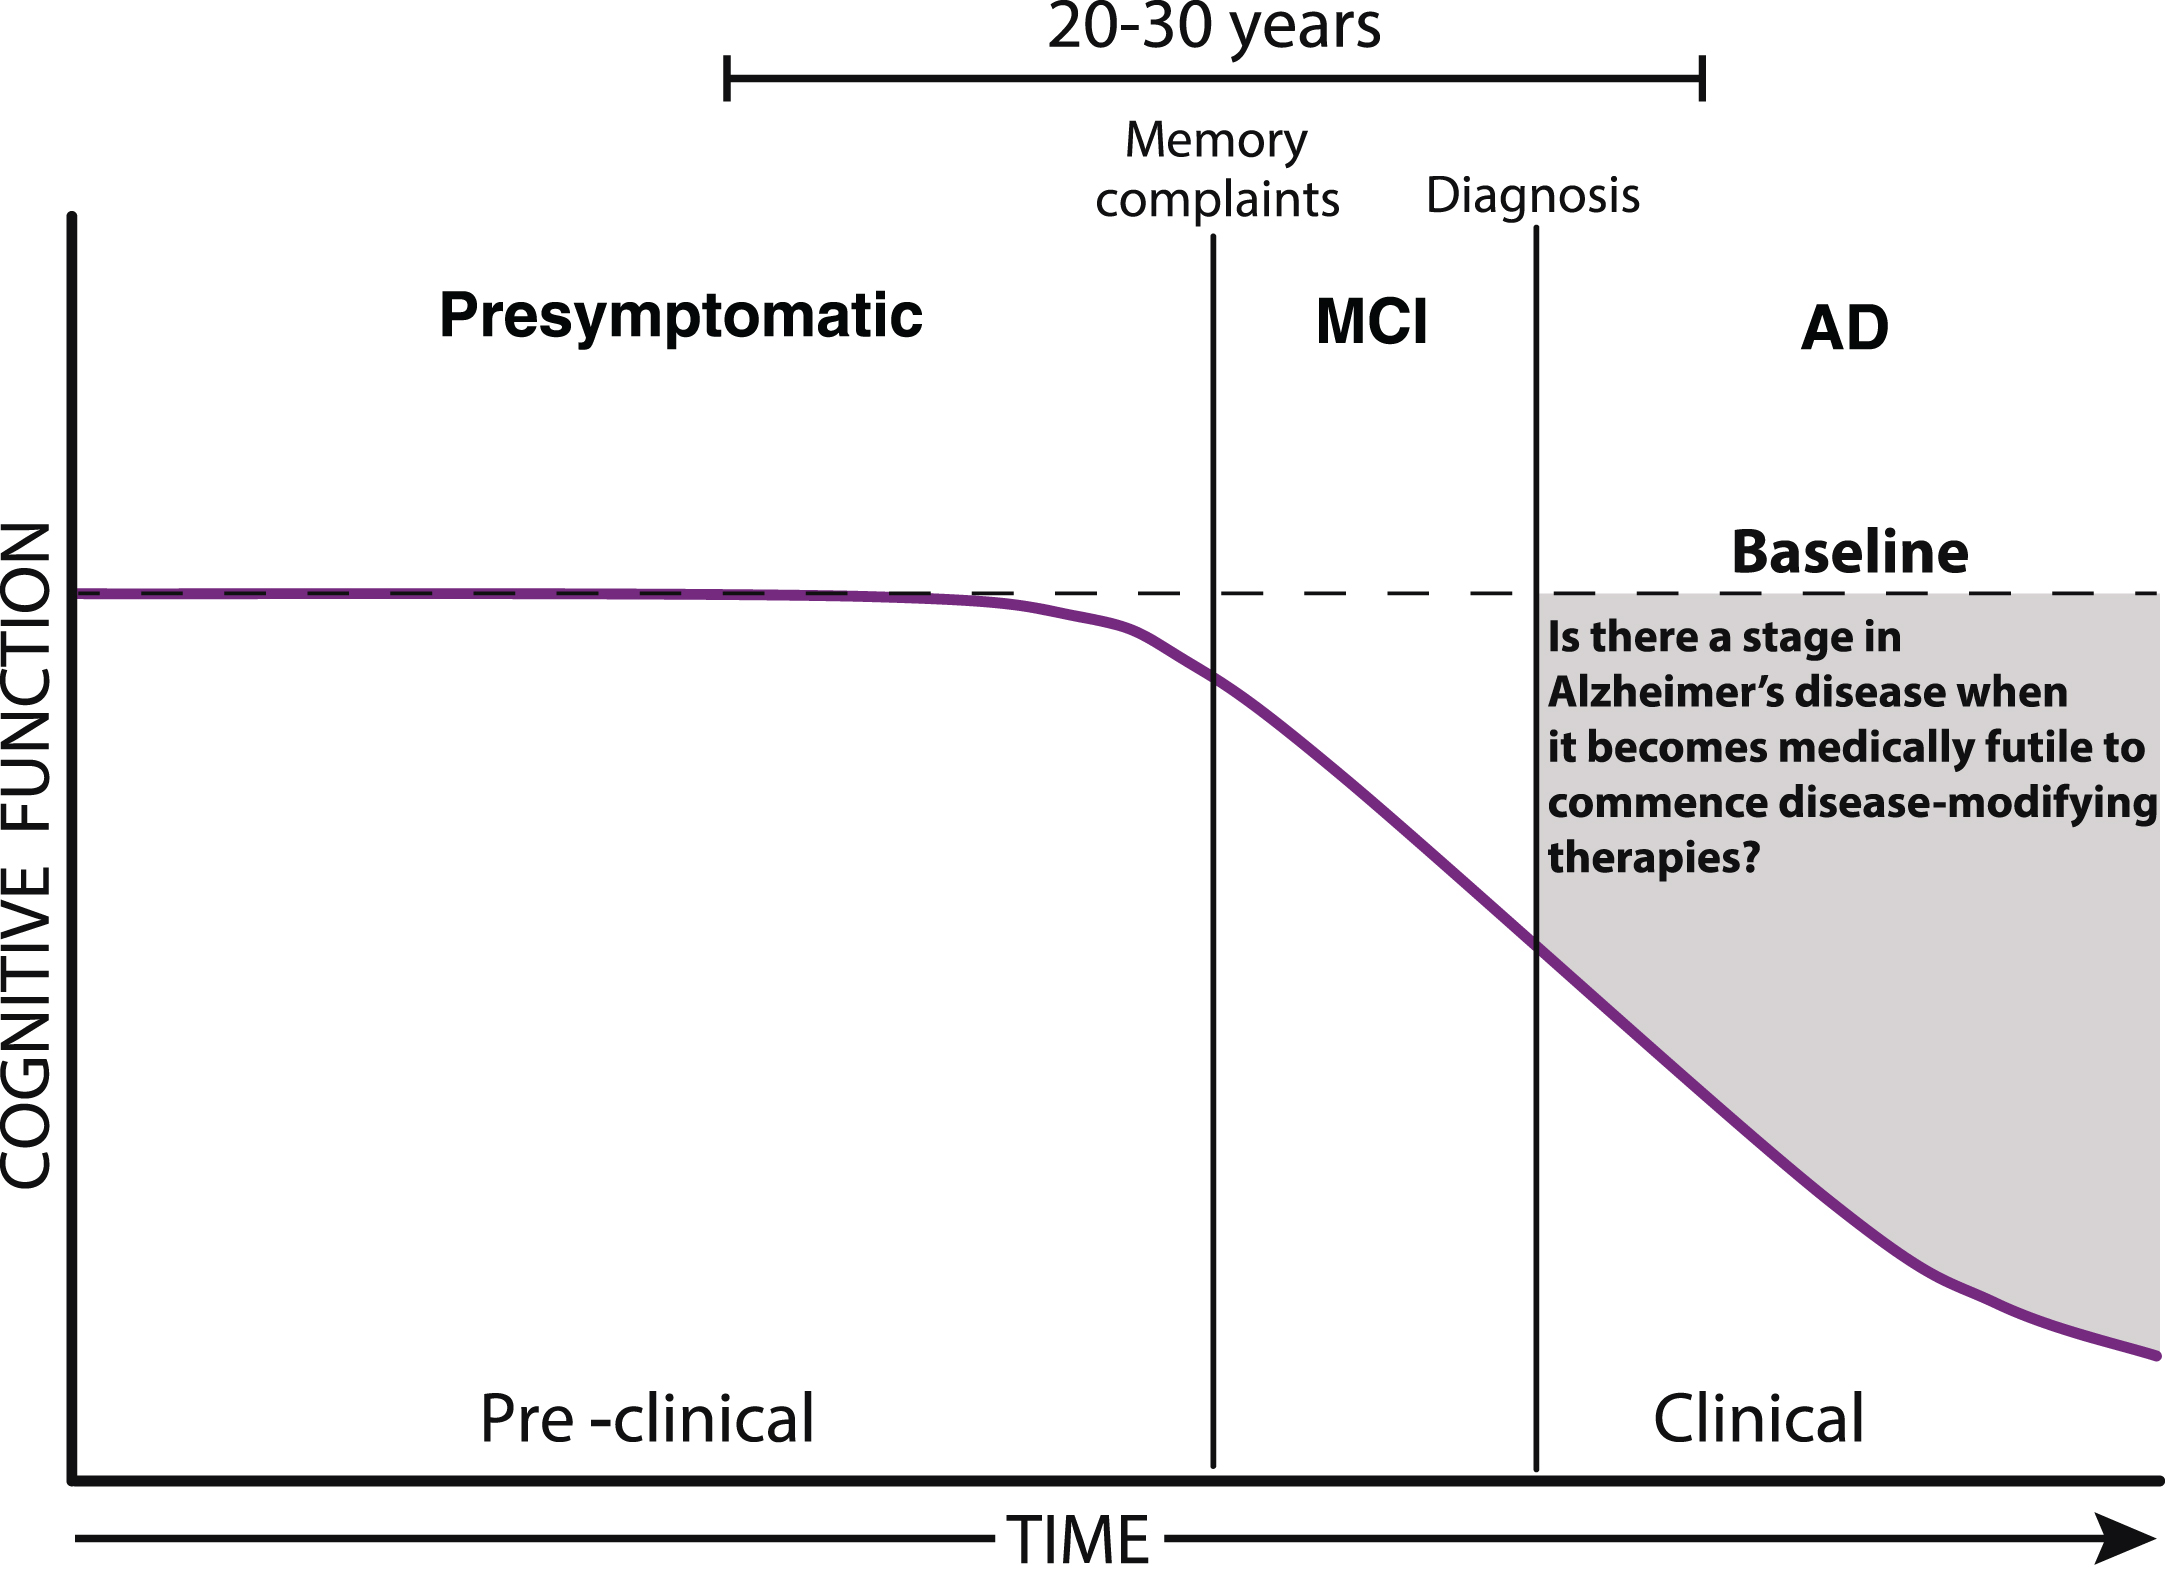 The progression of Alzheimer’s disease. As the pathological burden of Alzheimer’s disease increases there may come a time when it becomes medically futile to commence disease-modifying therapies. Diagnostic designations include mild cognitive impairment (MCI), and Alzheimer’s disease (AD).